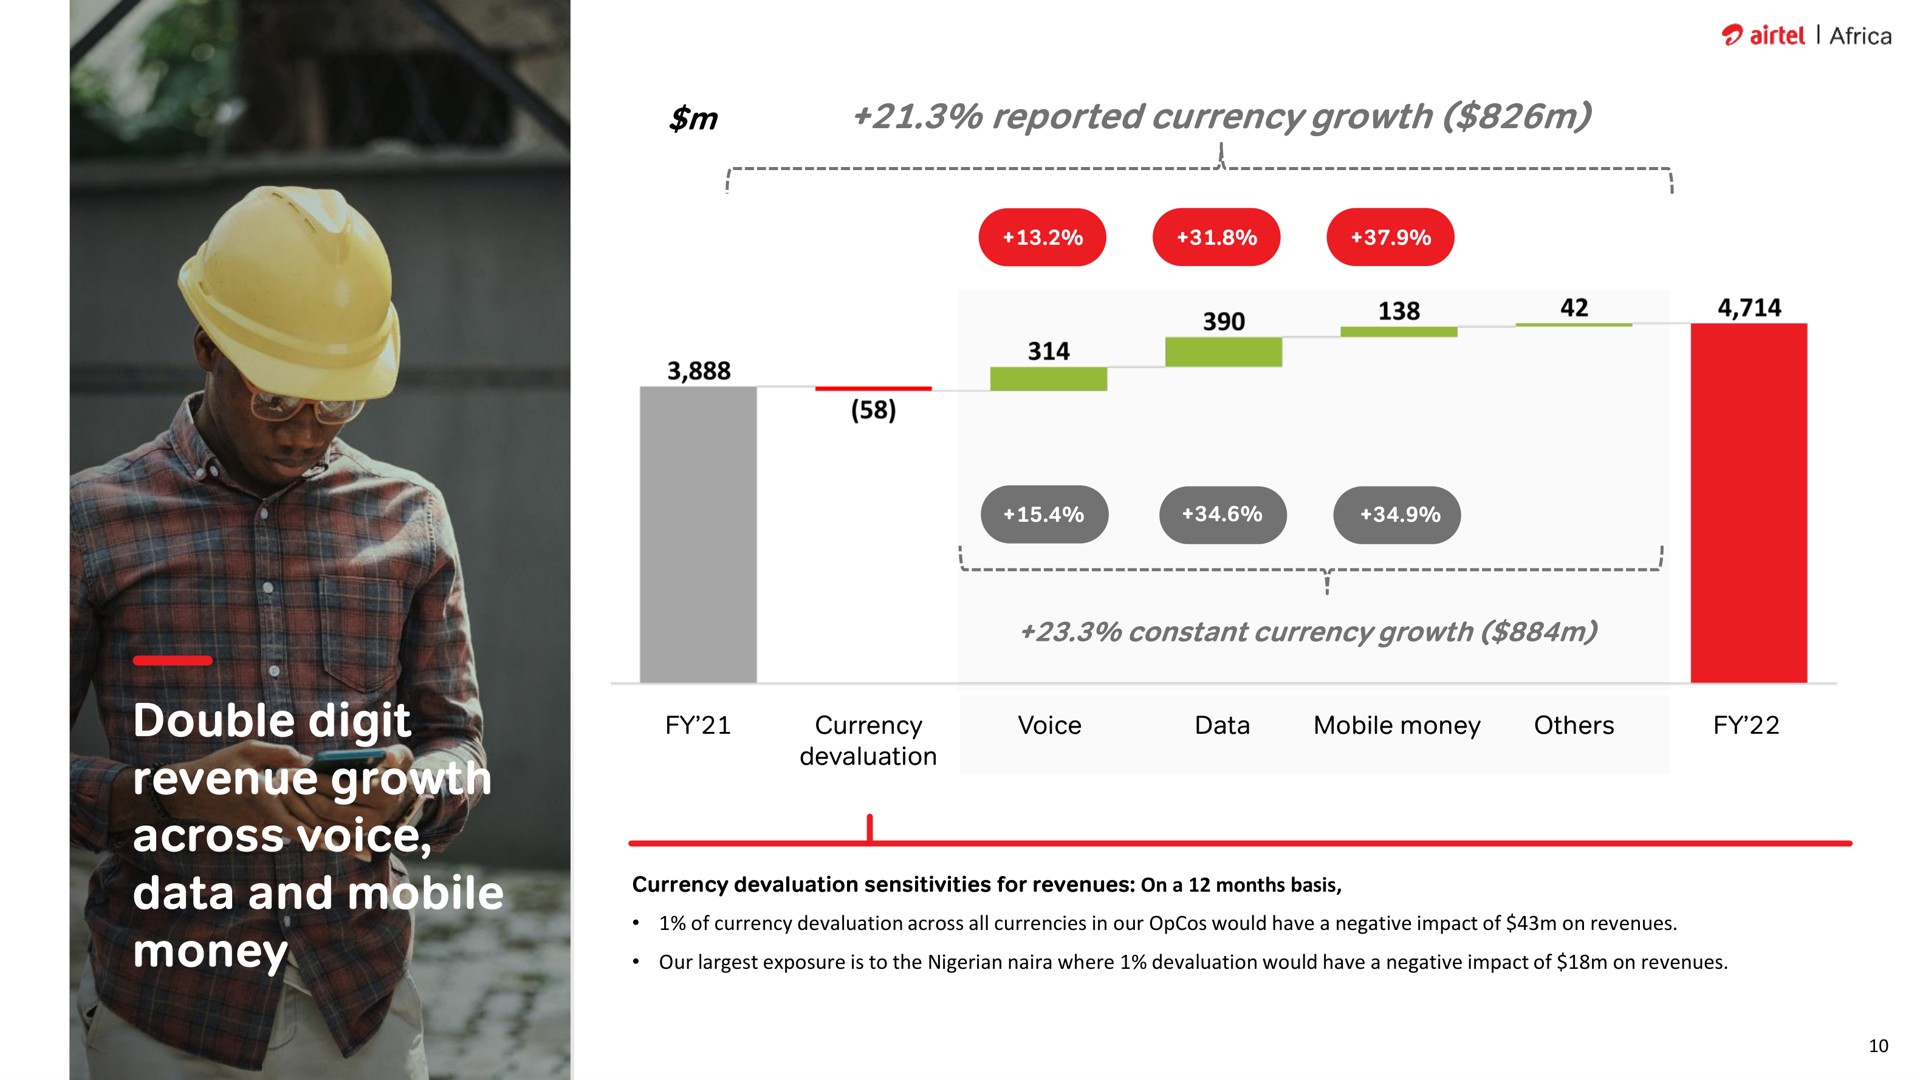 double digit revenue growth across voice data and mobile money reported currency devaluation an mane | Airtel Africa